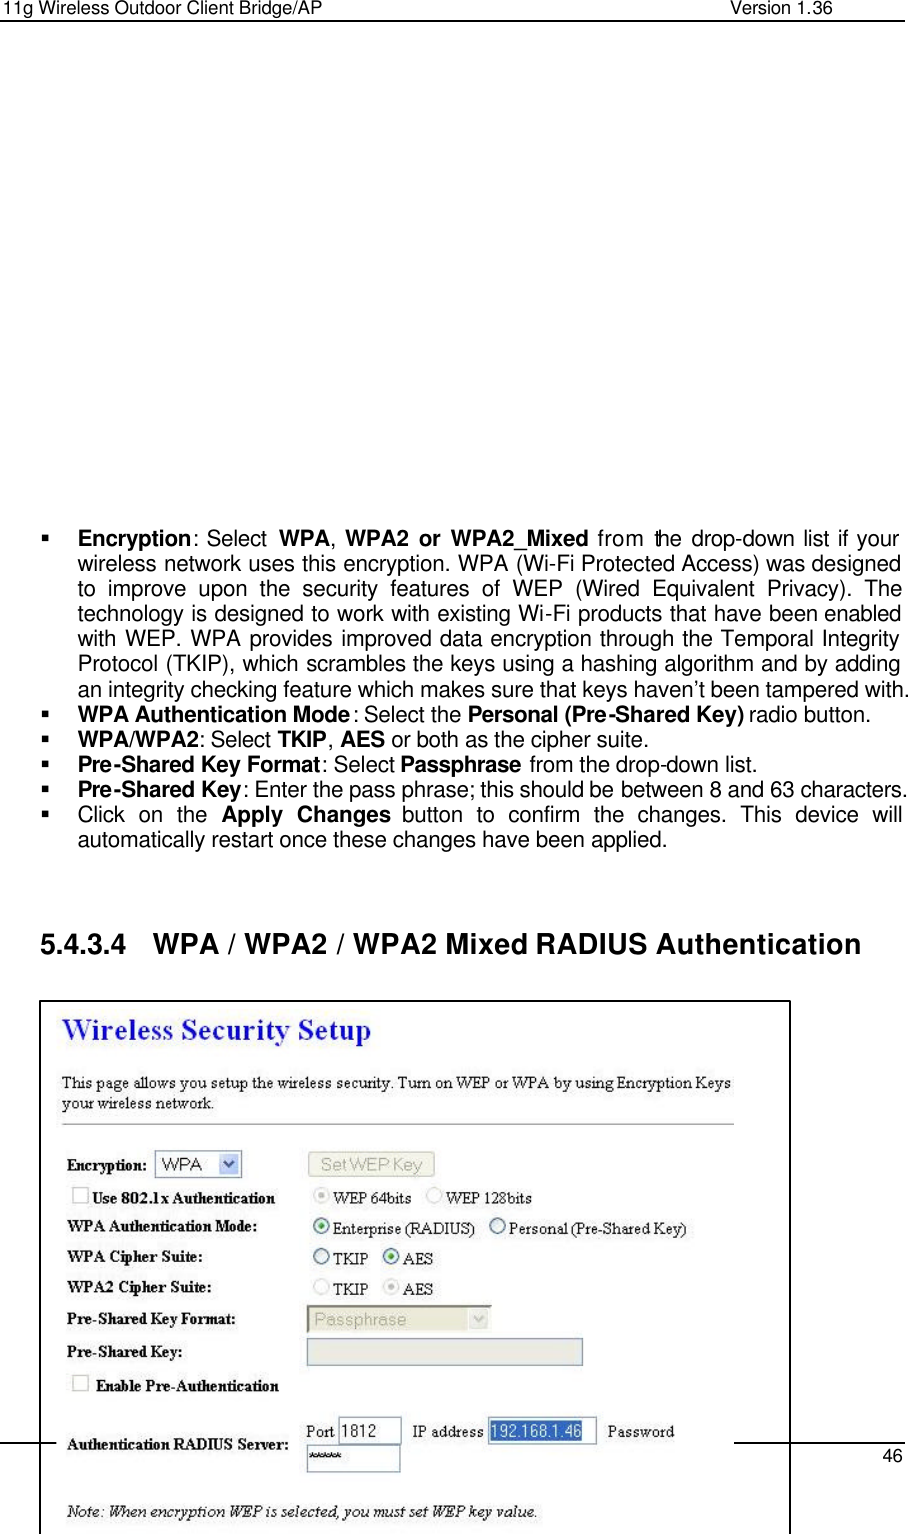 11g Wireless Outdoor Client Bridge/AP                Version 1.36    46                    § Encryption: Select  WPA,  WPA2 or WPA2_Mixed from the drop-down list if your wireless network uses this encryption. WPA (Wi-Fi Protected Access) was designed to improve upon the security features of WEP (Wired Equivalent Privacy). The technology is designed to work with existing Wi-Fi products that have been enabled with WEP. WPA provides improved data encryption through the Temporal Integrity Protocol (TKIP), which scrambles the keys using a hashing algorithm and by adding an integrity checking feature which makes sure that keys haven’t been tampered with.  § WPA Authentication Mode: Select the Personal (Pre-Shared Key) radio button.  § WPA/WPA2: Select TKIP, AES or both as the cipher suite.  § Pre-Shared Key Format: Select Passphrase from the drop-down list.  § Pre-Shared Key: Enter the pass phrase; this should be between 8 and 63 characters.  § Click on the Apply Changes button to confirm the changes. This device will automatically restart once these changes have been applied.     5.4.3.4 WPA / WPA2 / WPA2 Mixed RADIUS Authentication                   